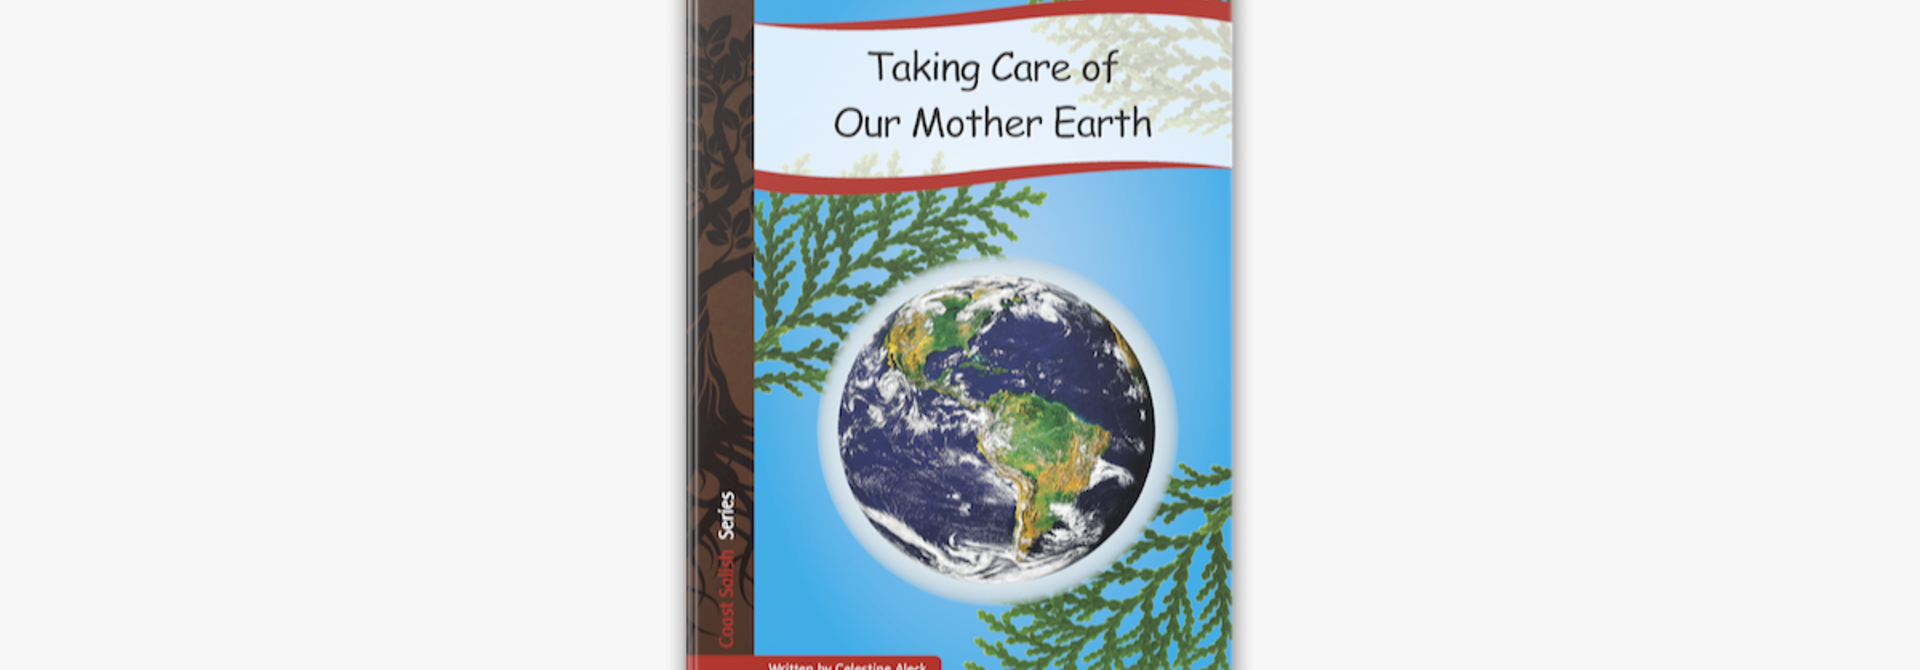 Strong Stories-Taking care of our mother earth